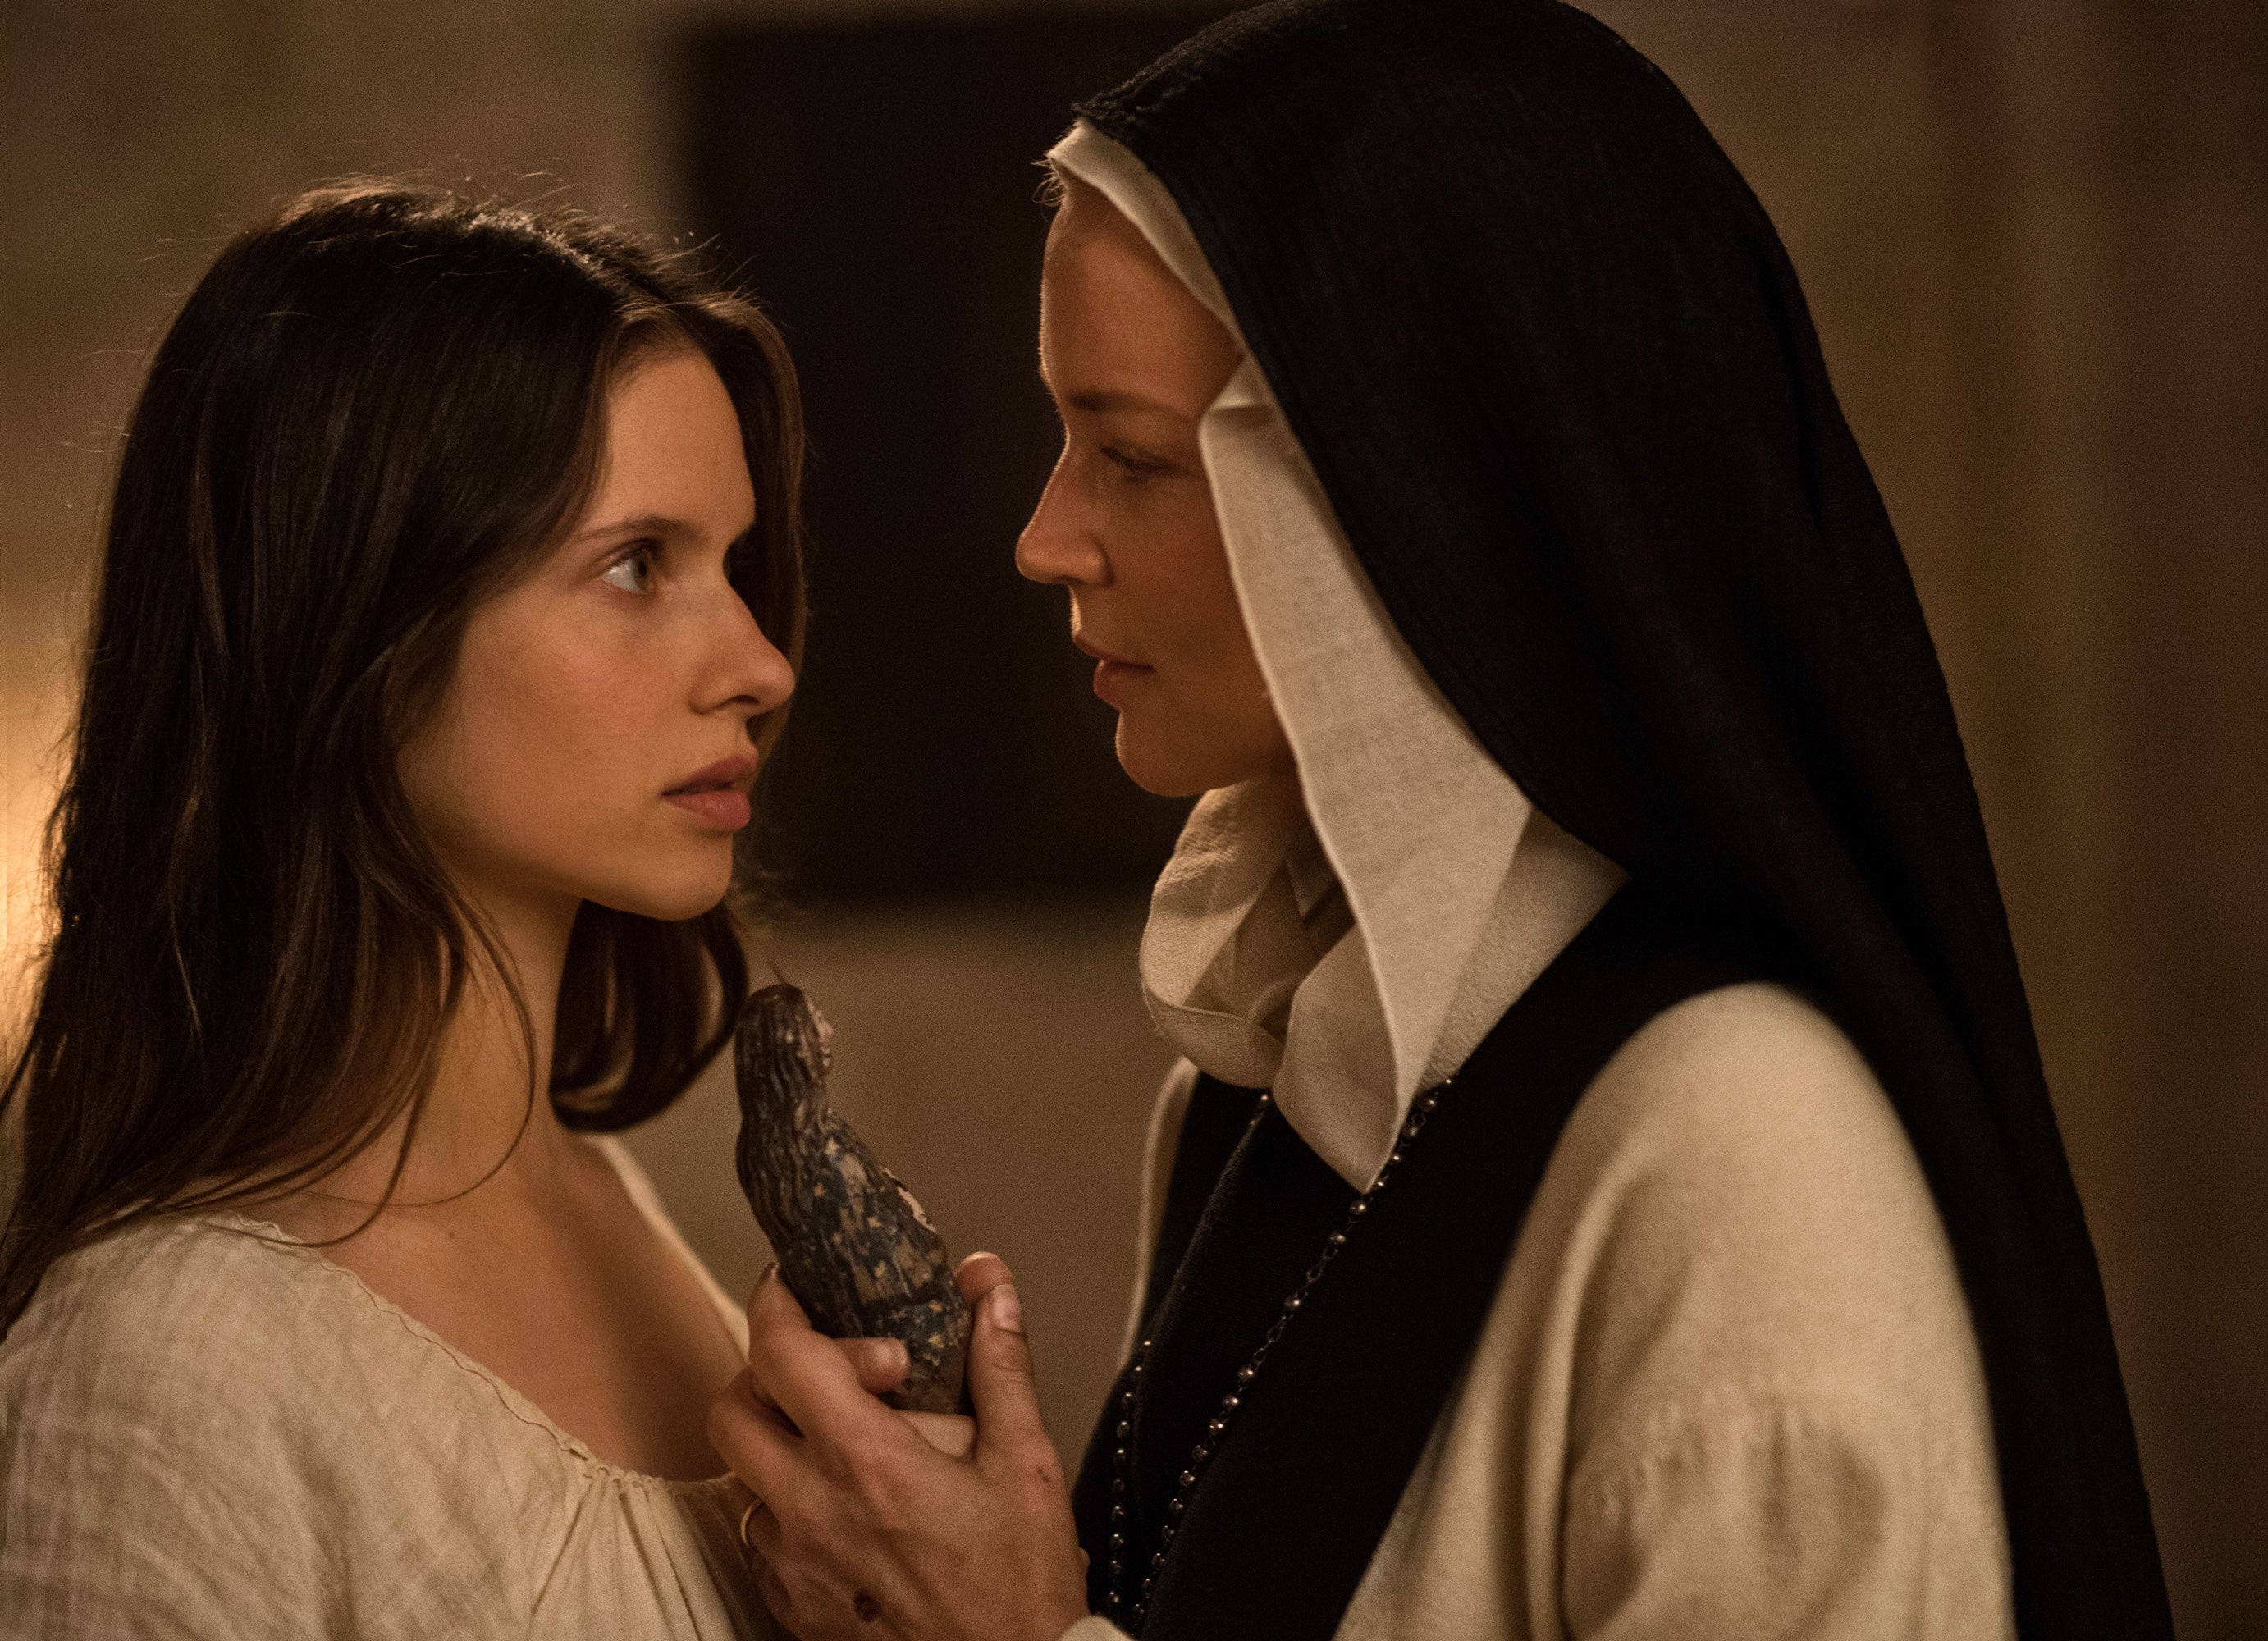 First Lesbian Forced Dildo - Why Paul Verhoeven's Benedetta Is Problematic